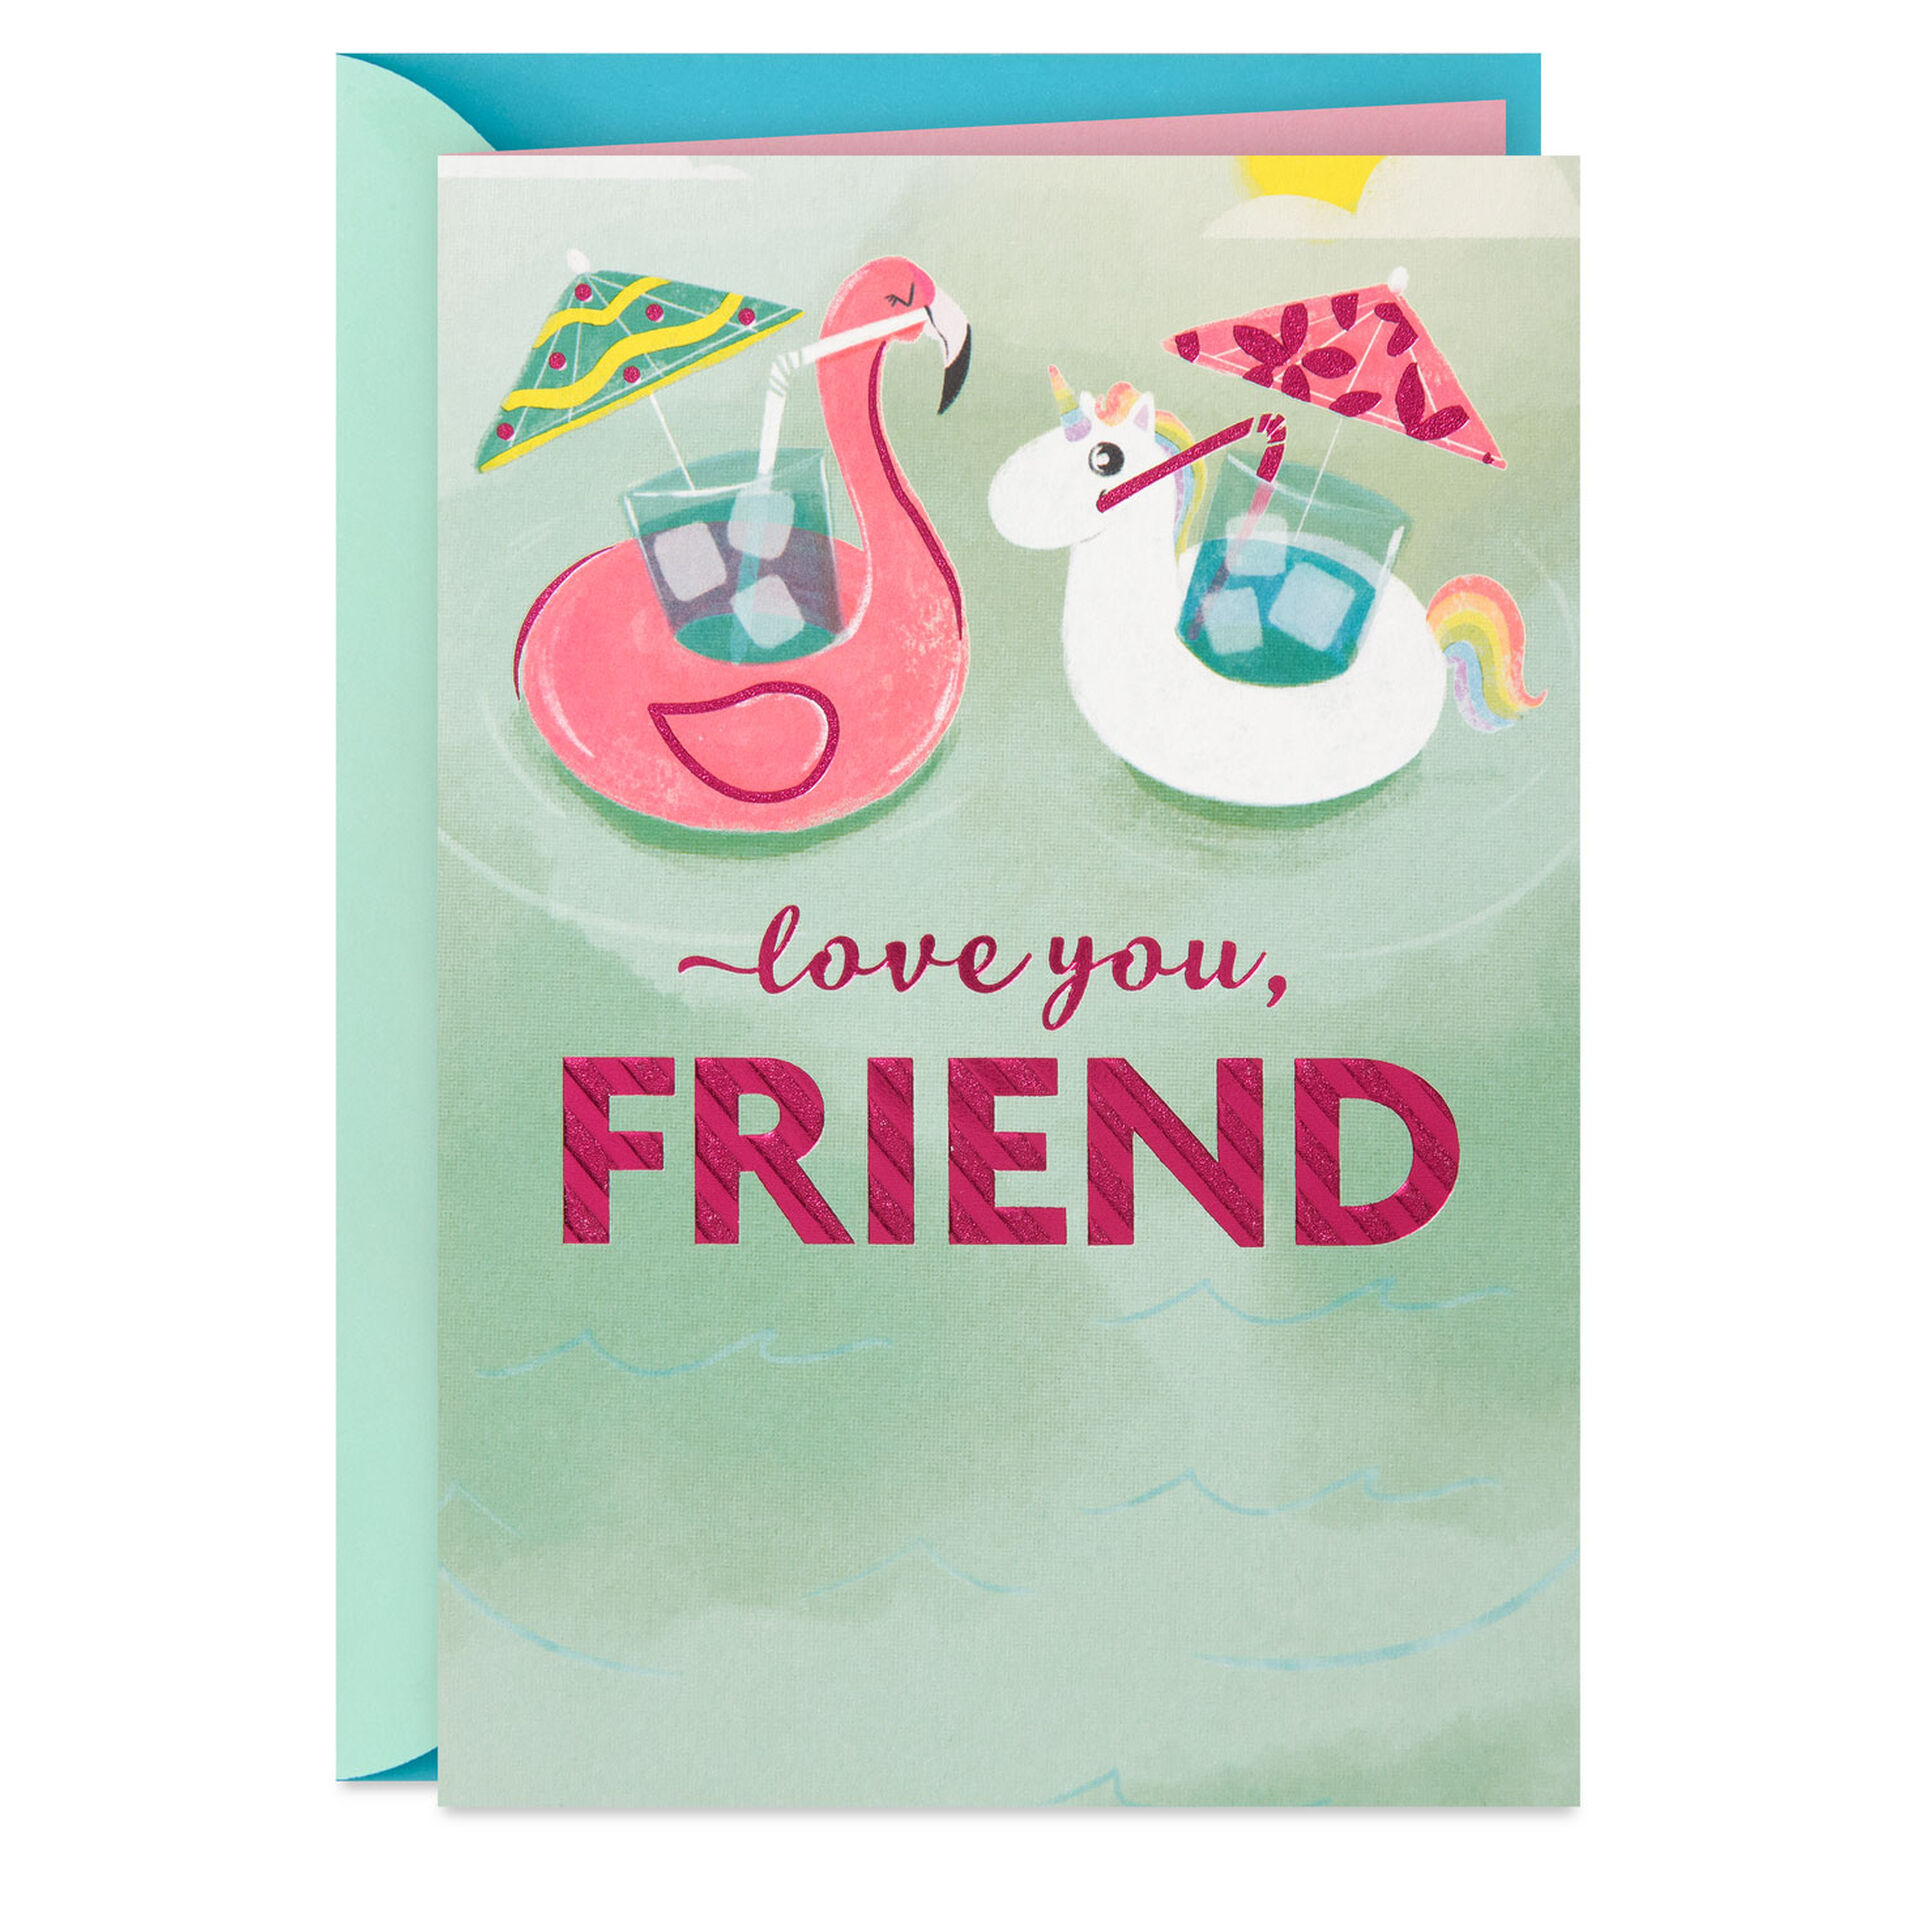 Friend-Pool-Floats-Birthday-Card-for-Her_299HBD3810_01